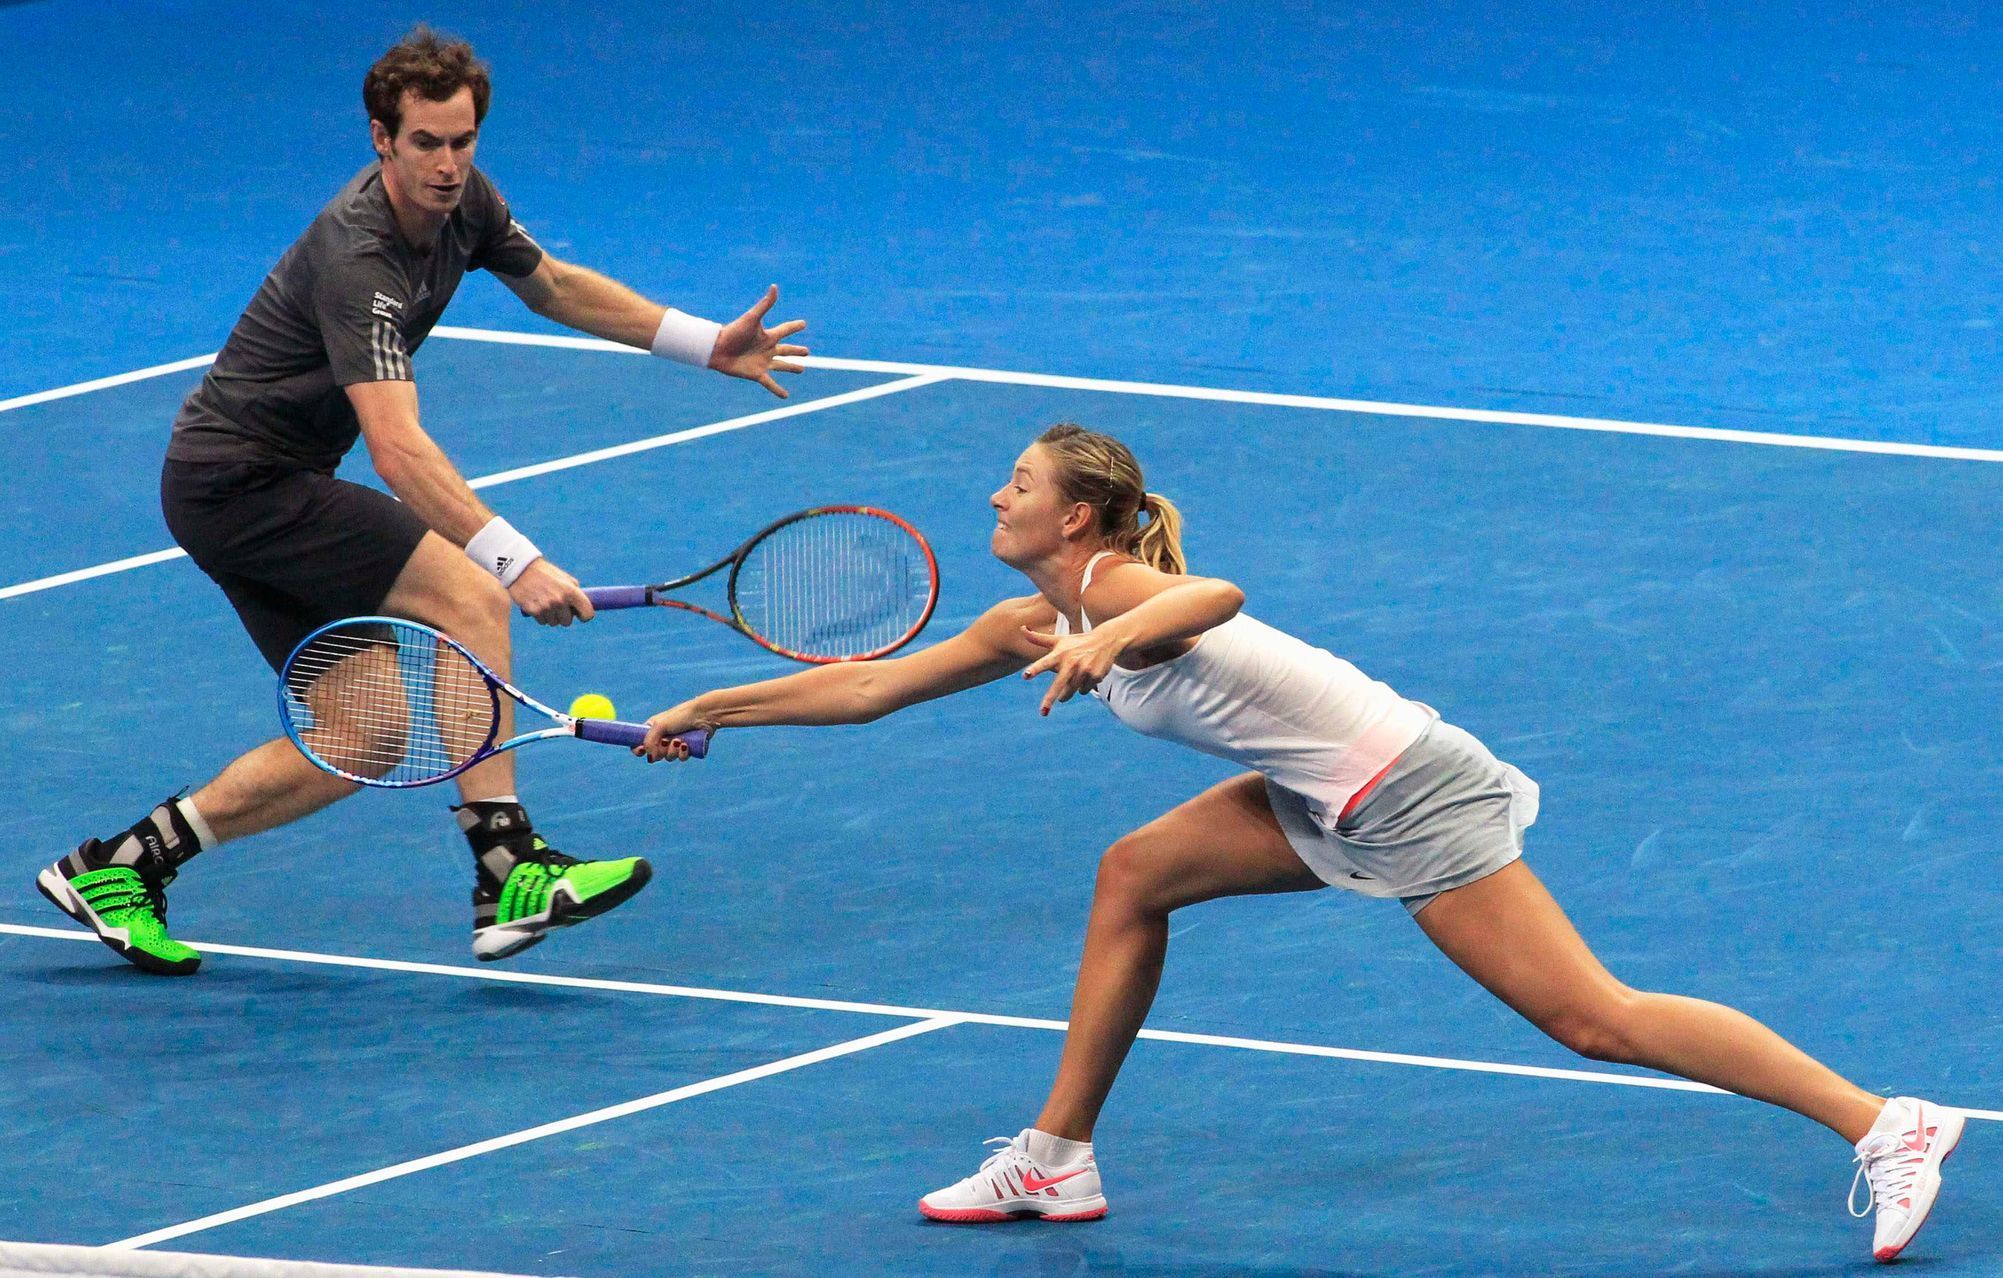 Sharapova and Murray of the Manila Mavericks hit a return to Mladenovic and Zimonjic of the UAE Royals during their mixed doubles tennis match at the IPTL competition in Manila